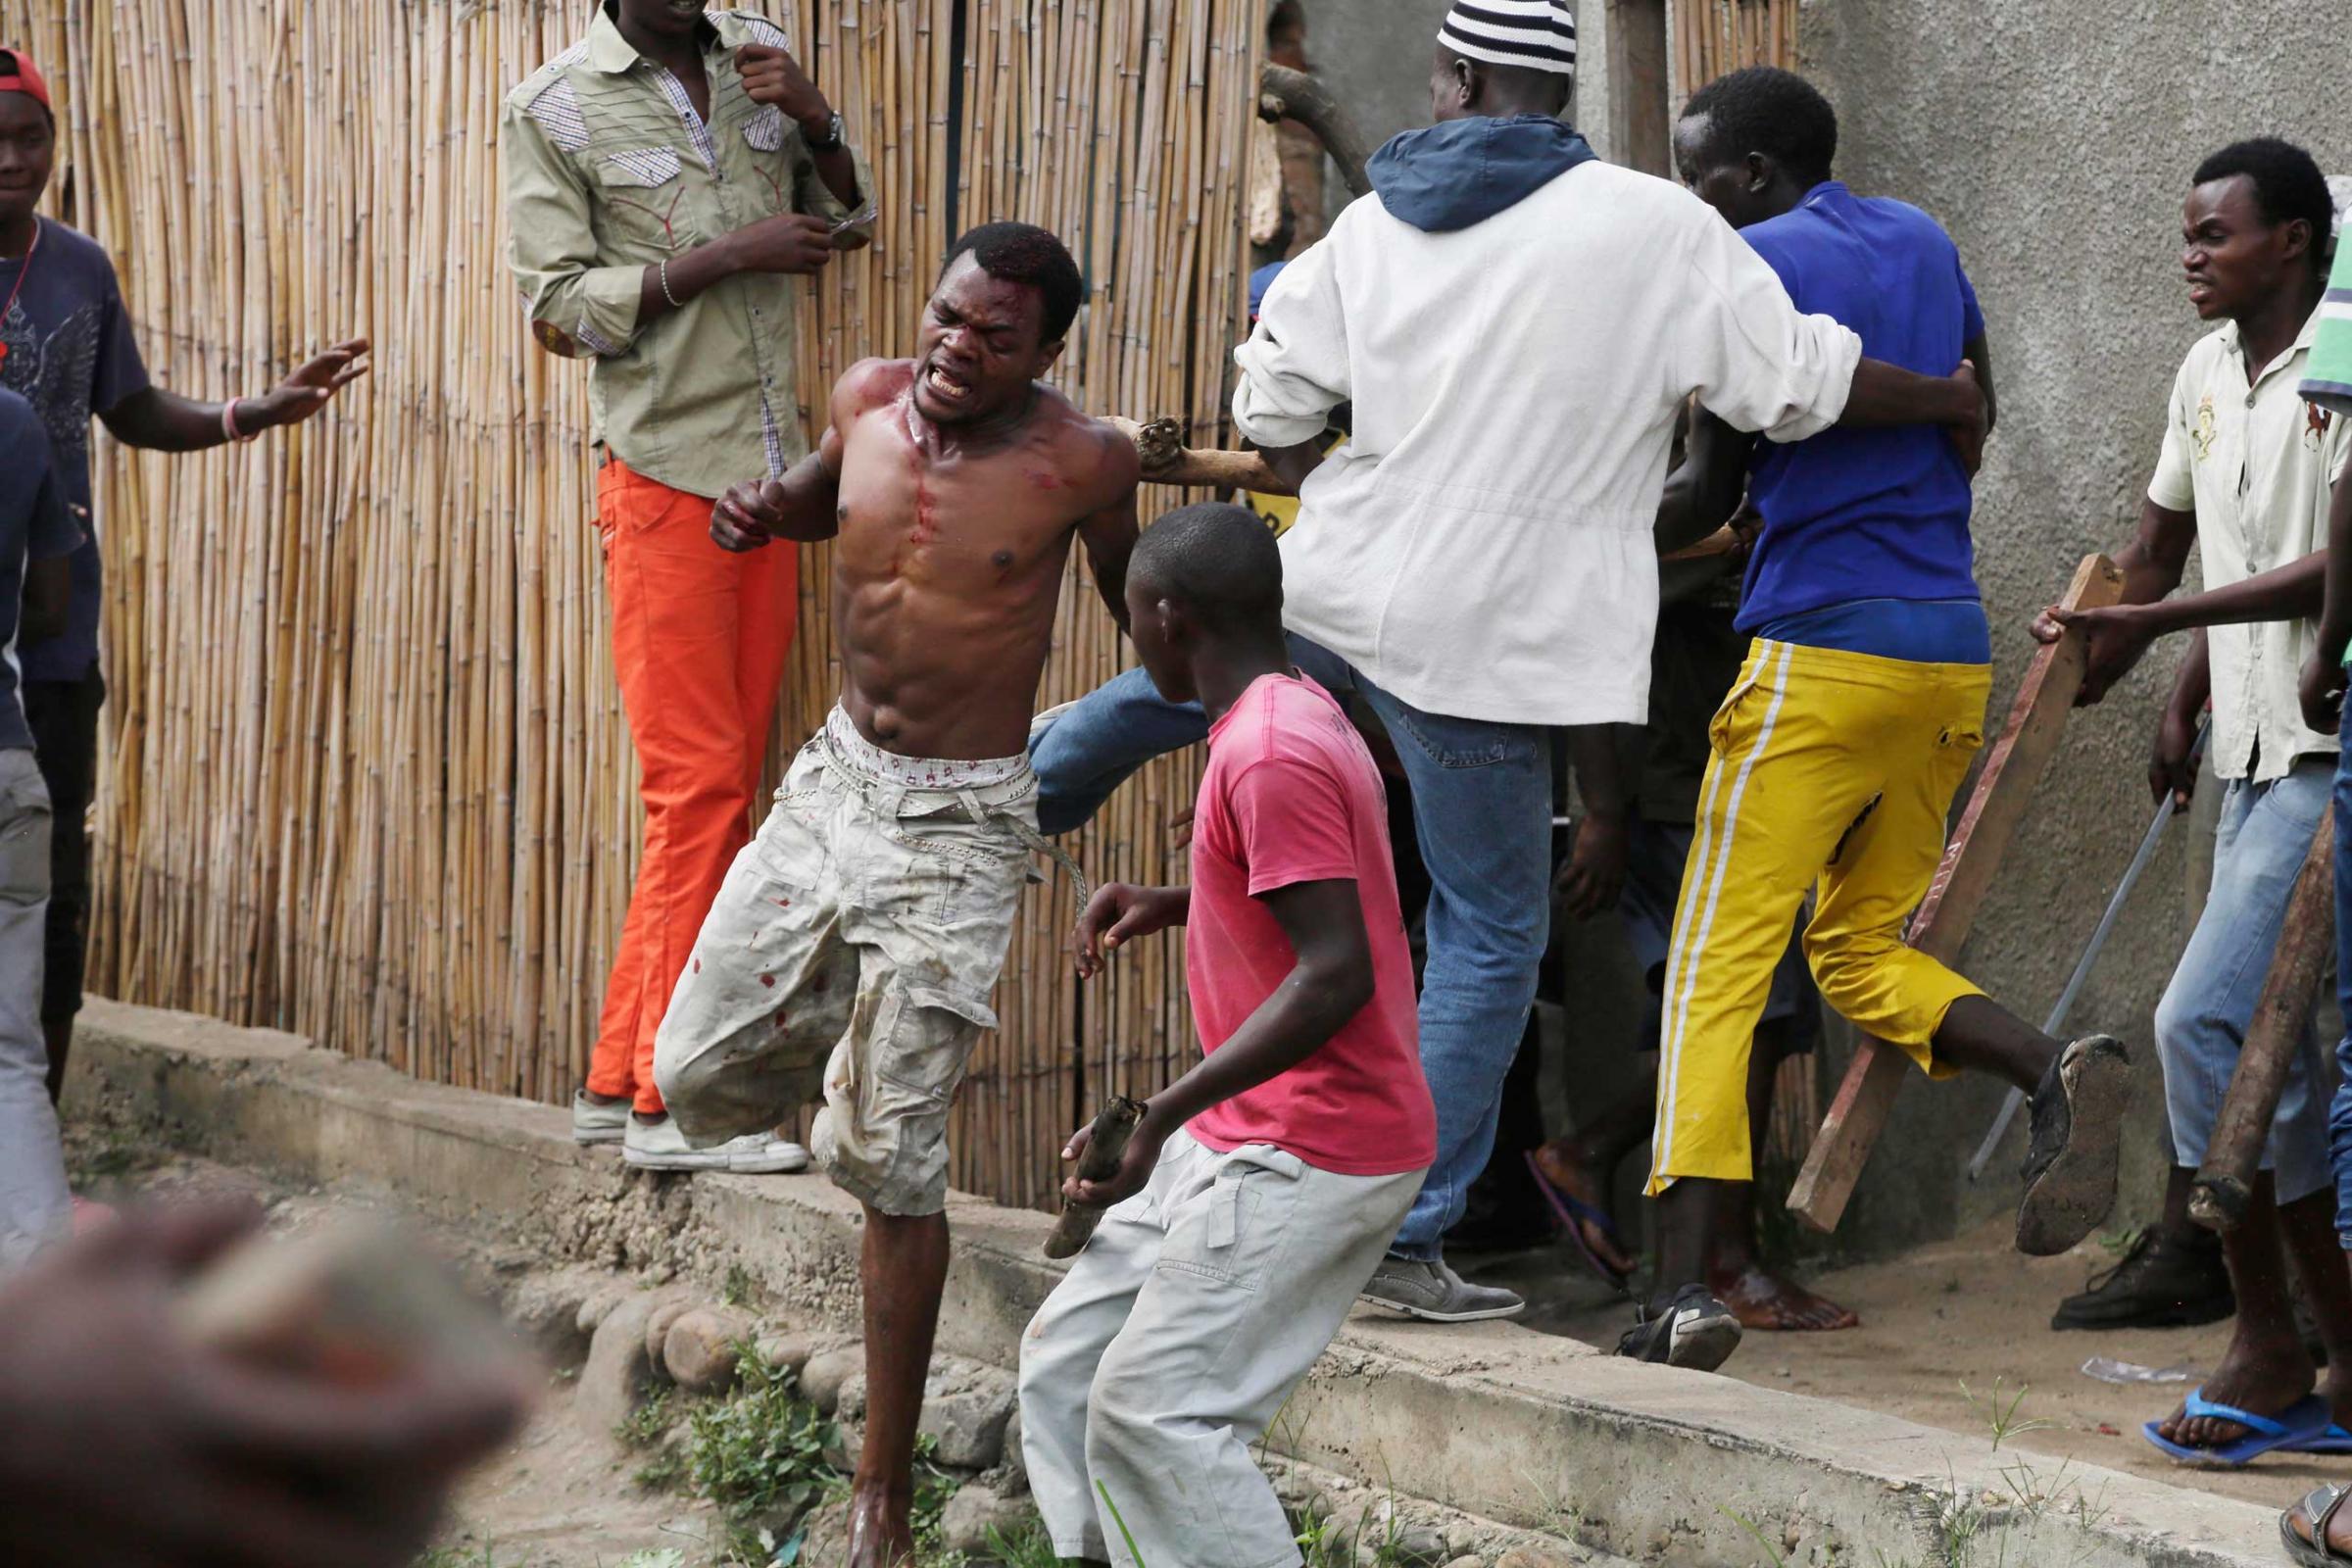 Niyonzima flees from his house while surrounded by a mob.